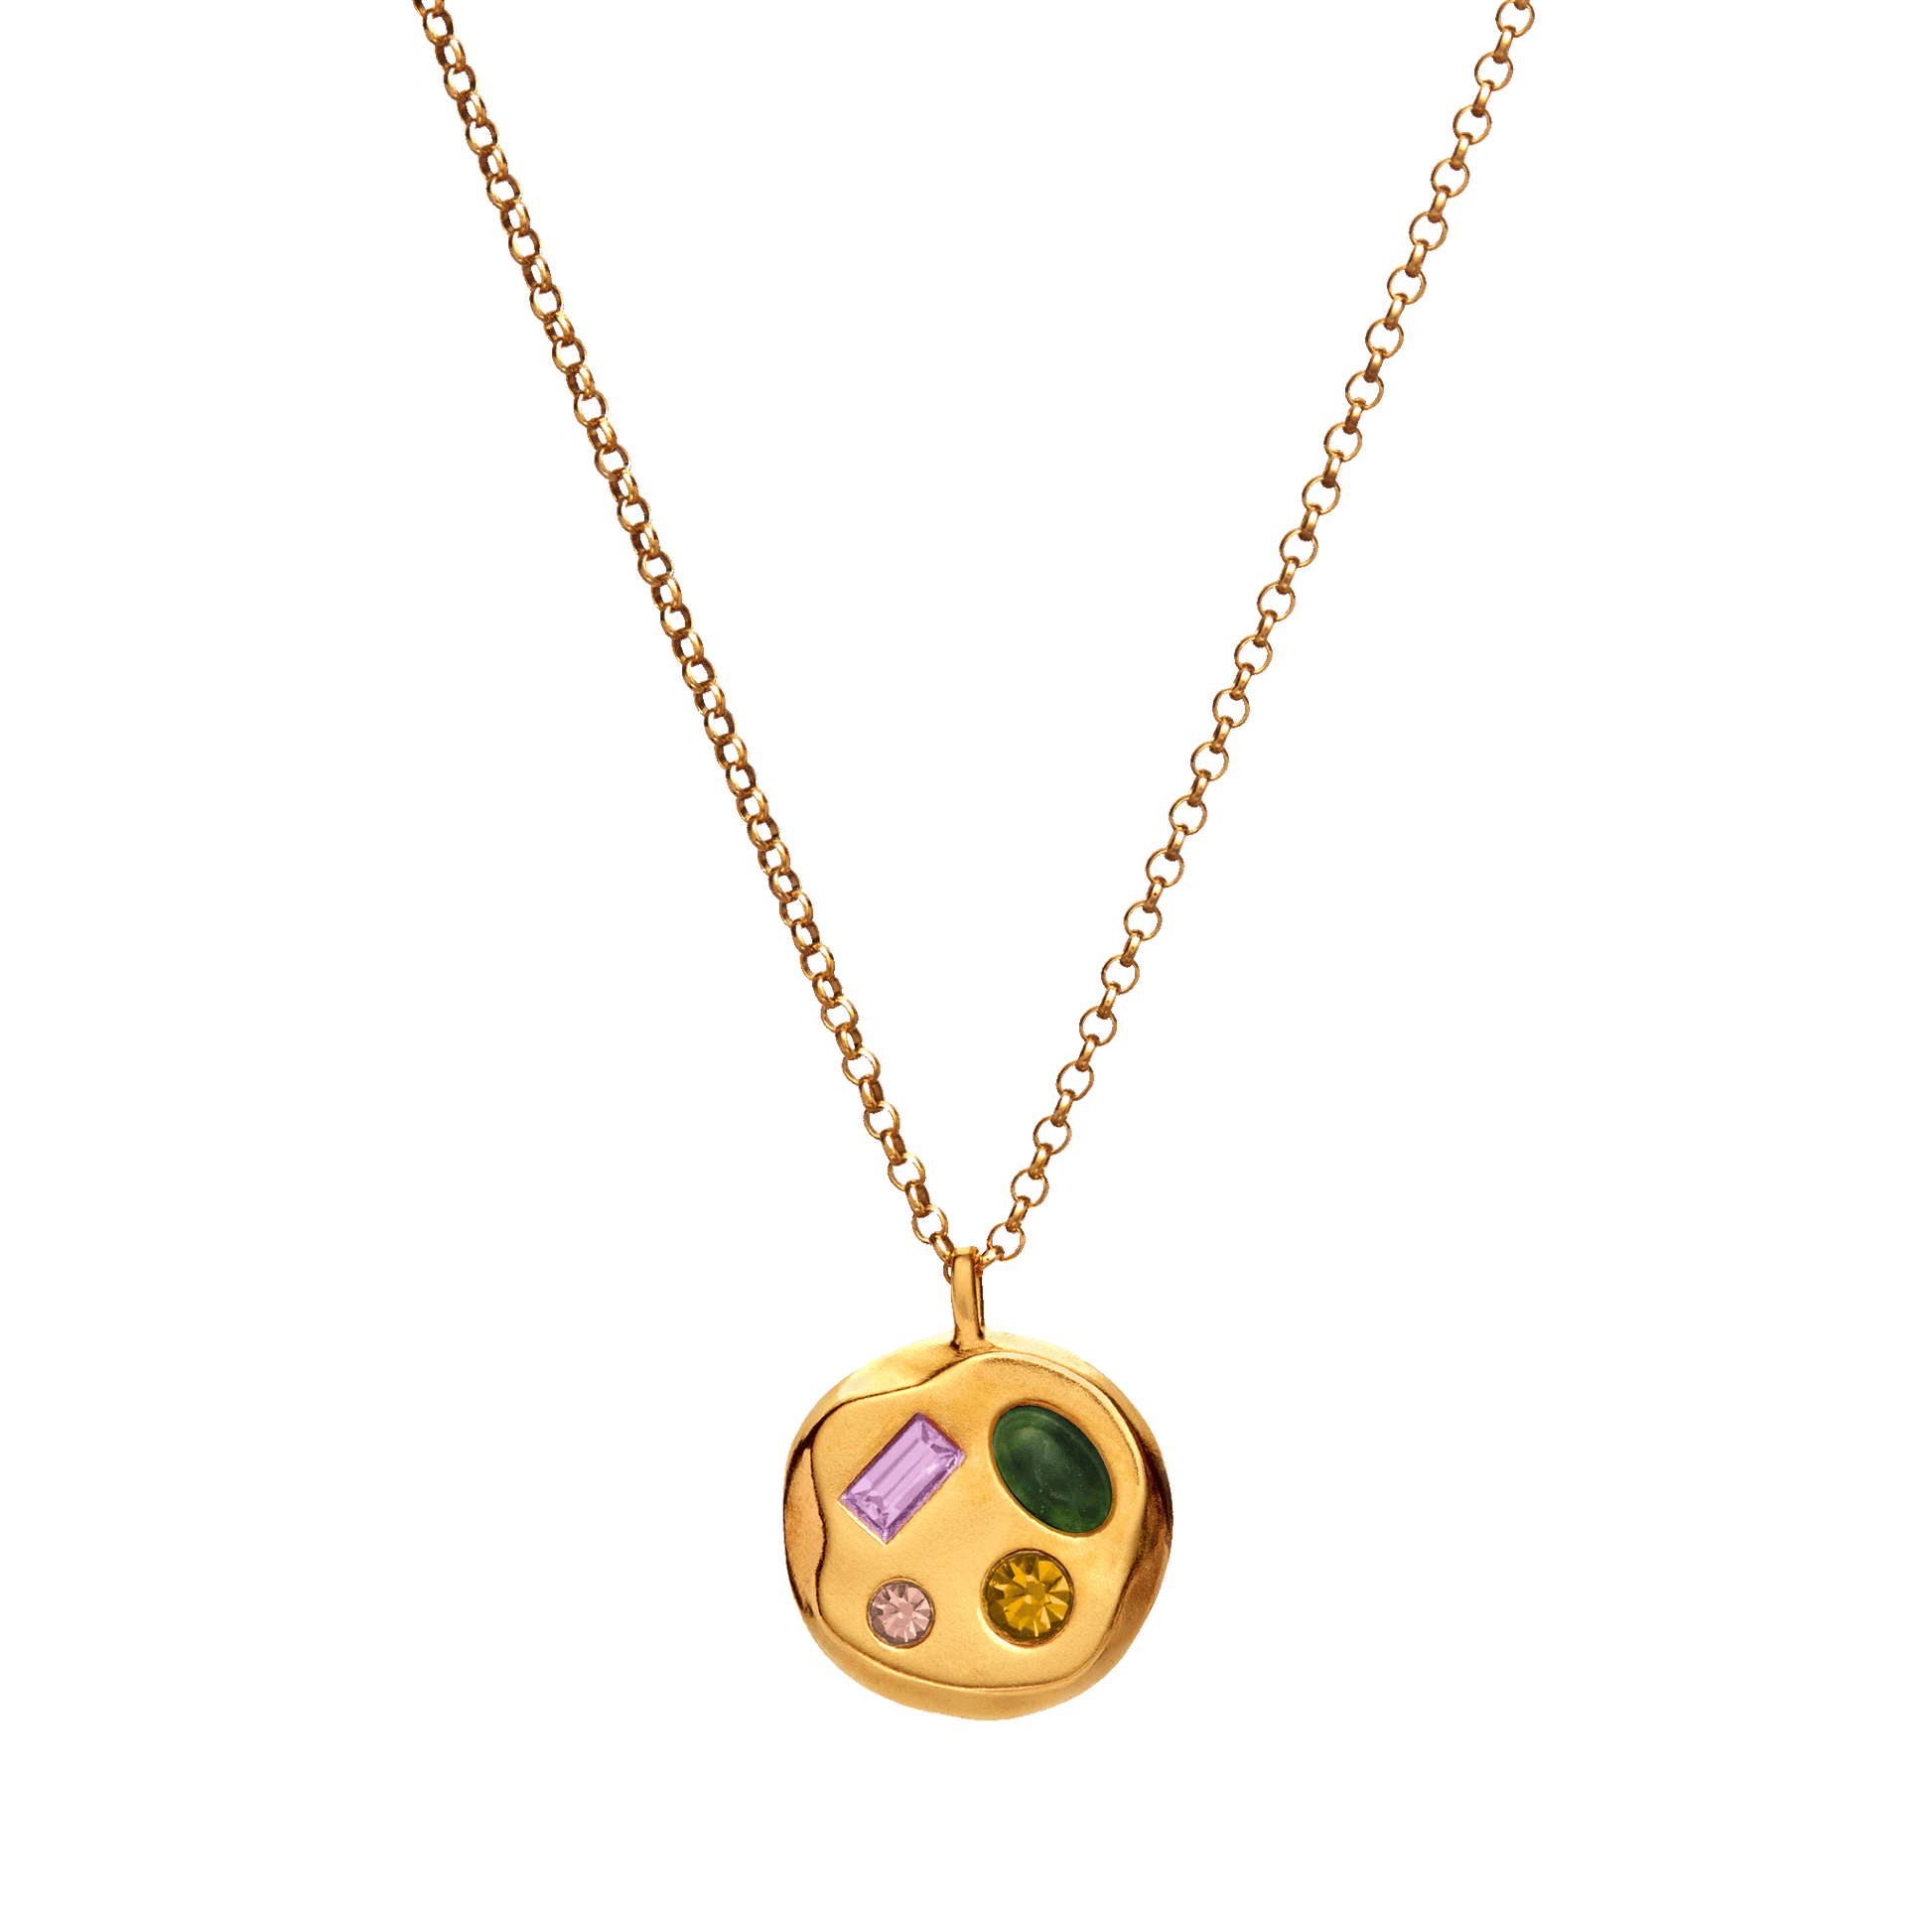 14k Gold Spiritual Jewelry | I Am Loved And Protected - Healing Necklace